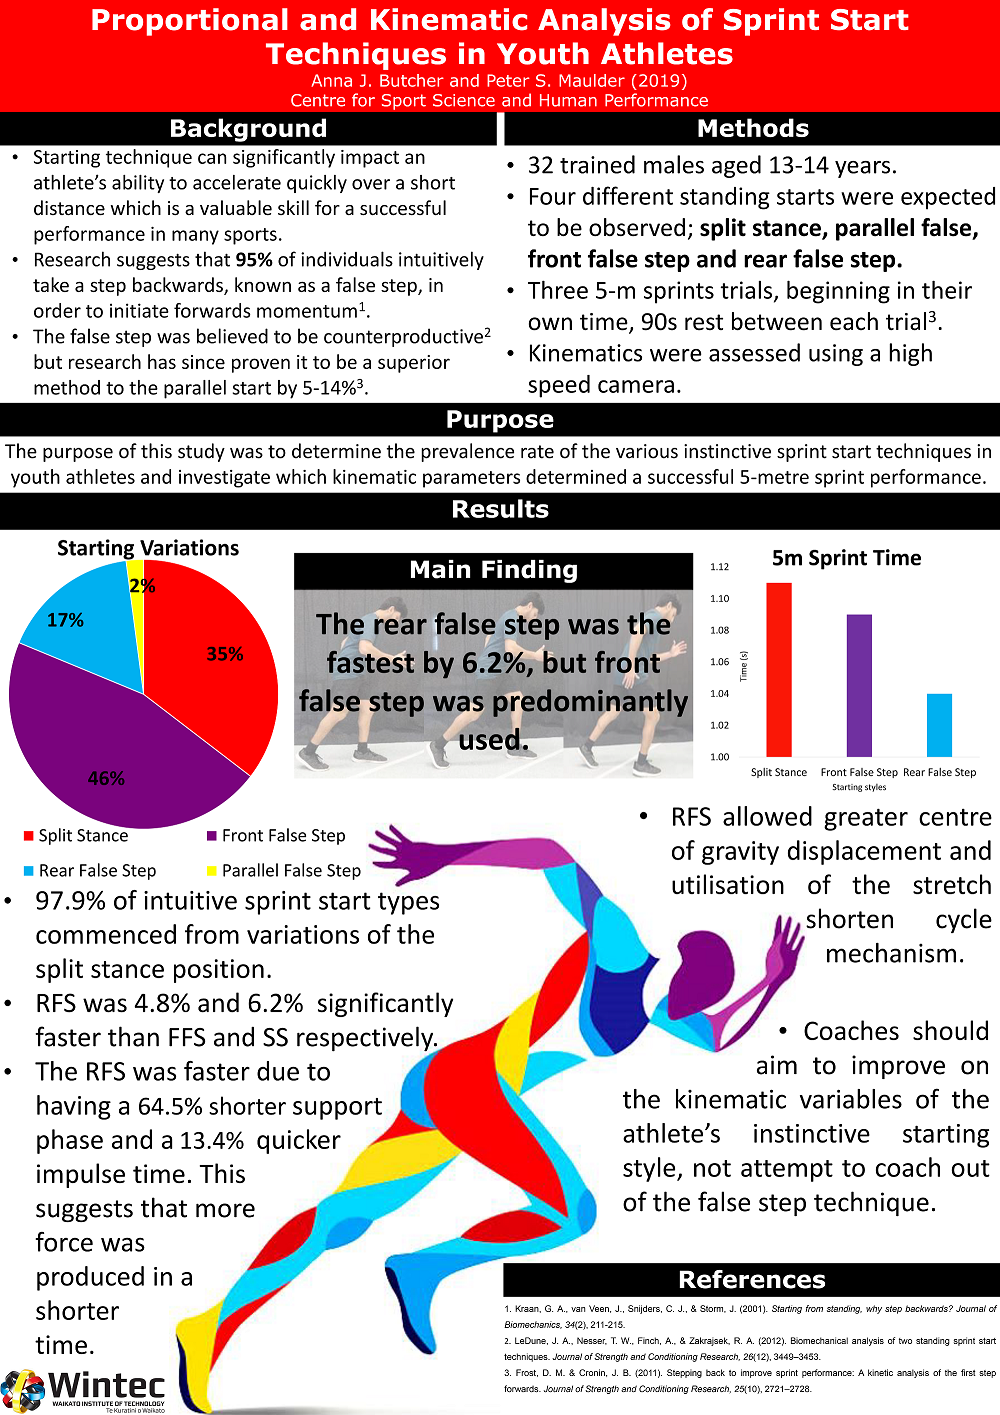 Proportional and Kinematic Analysis of Sprint Start Techniques in Youth Athletes